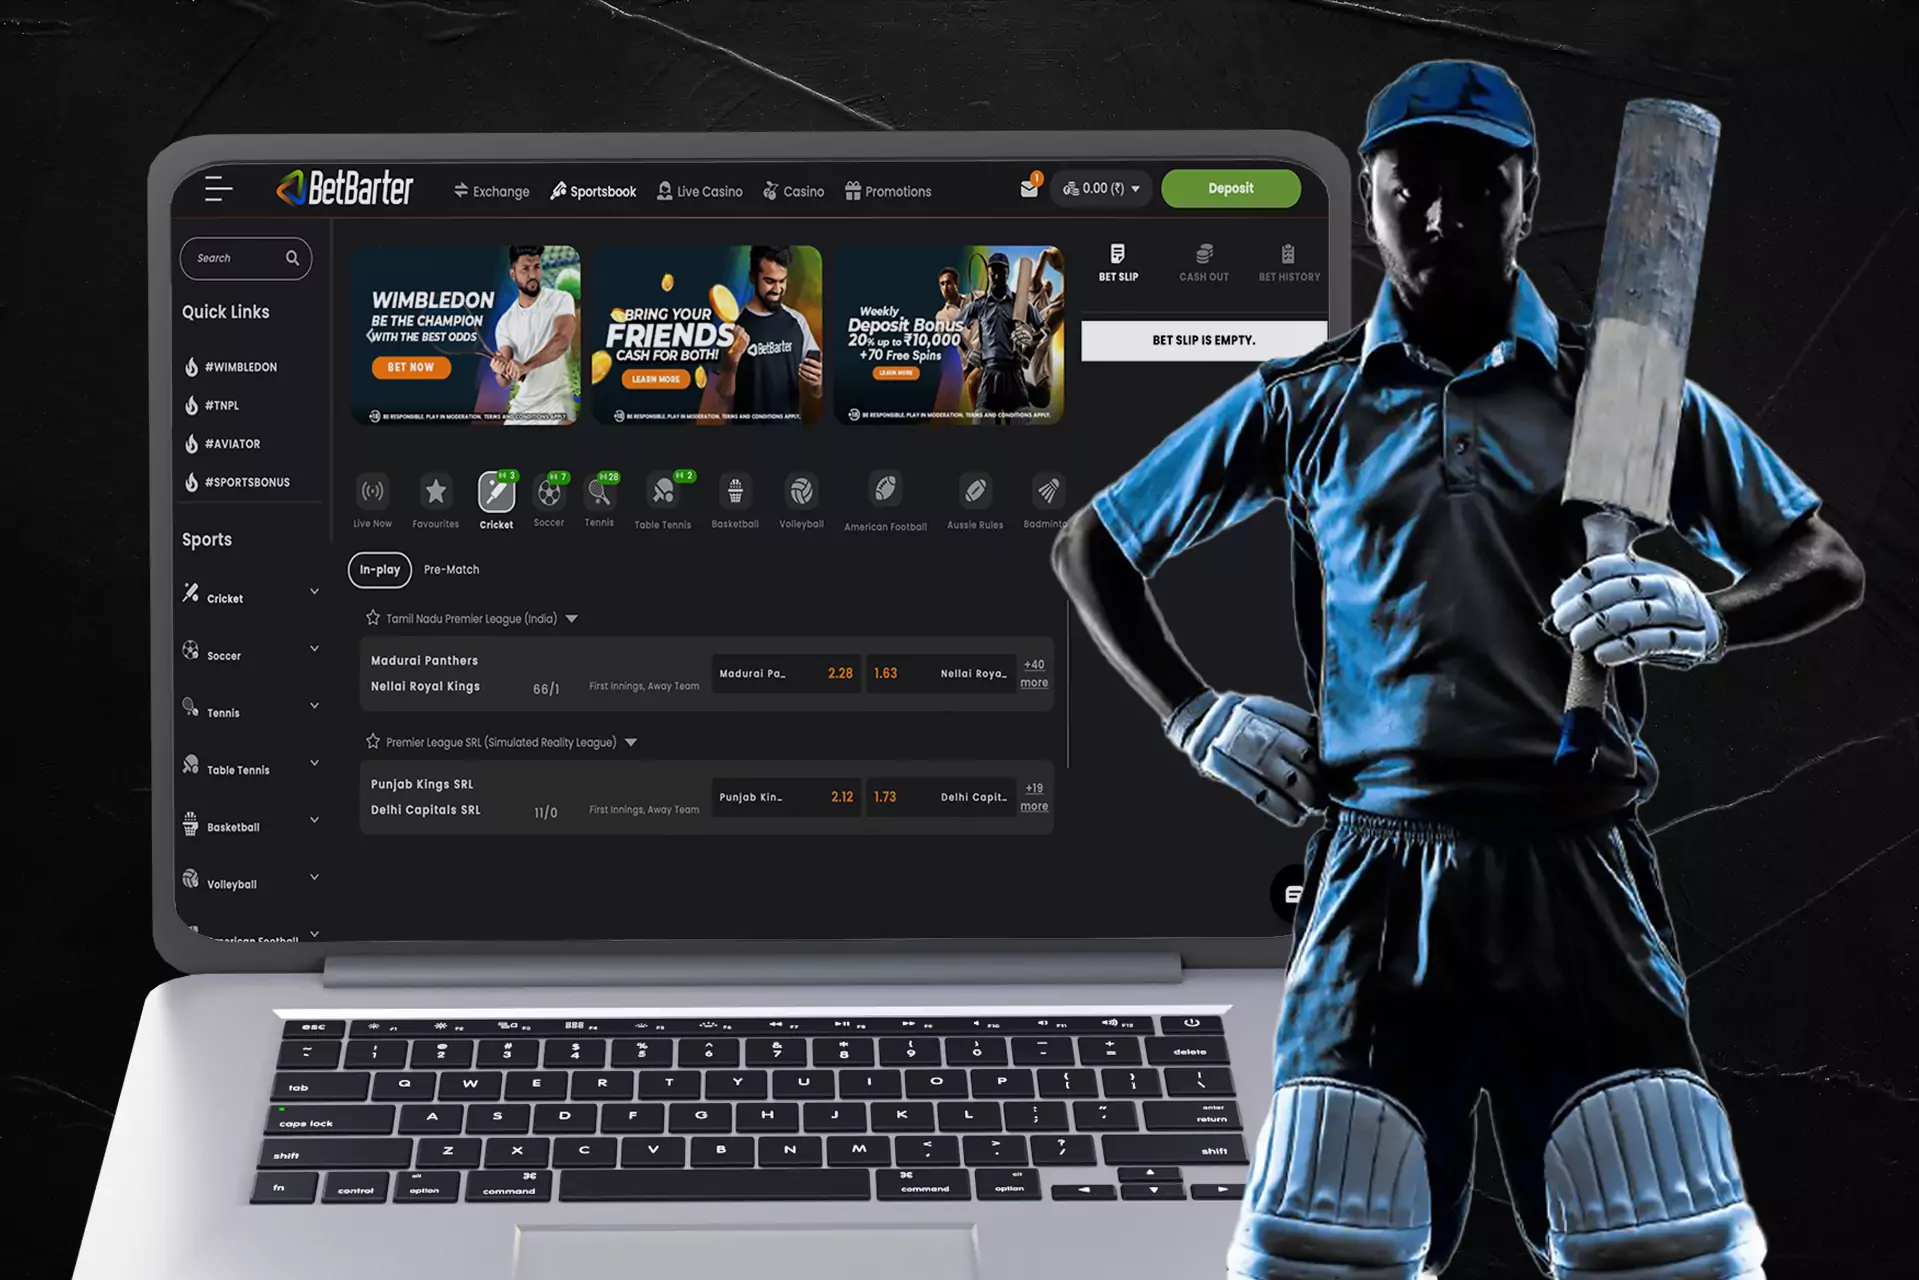 BetBarter supports cricket betting.